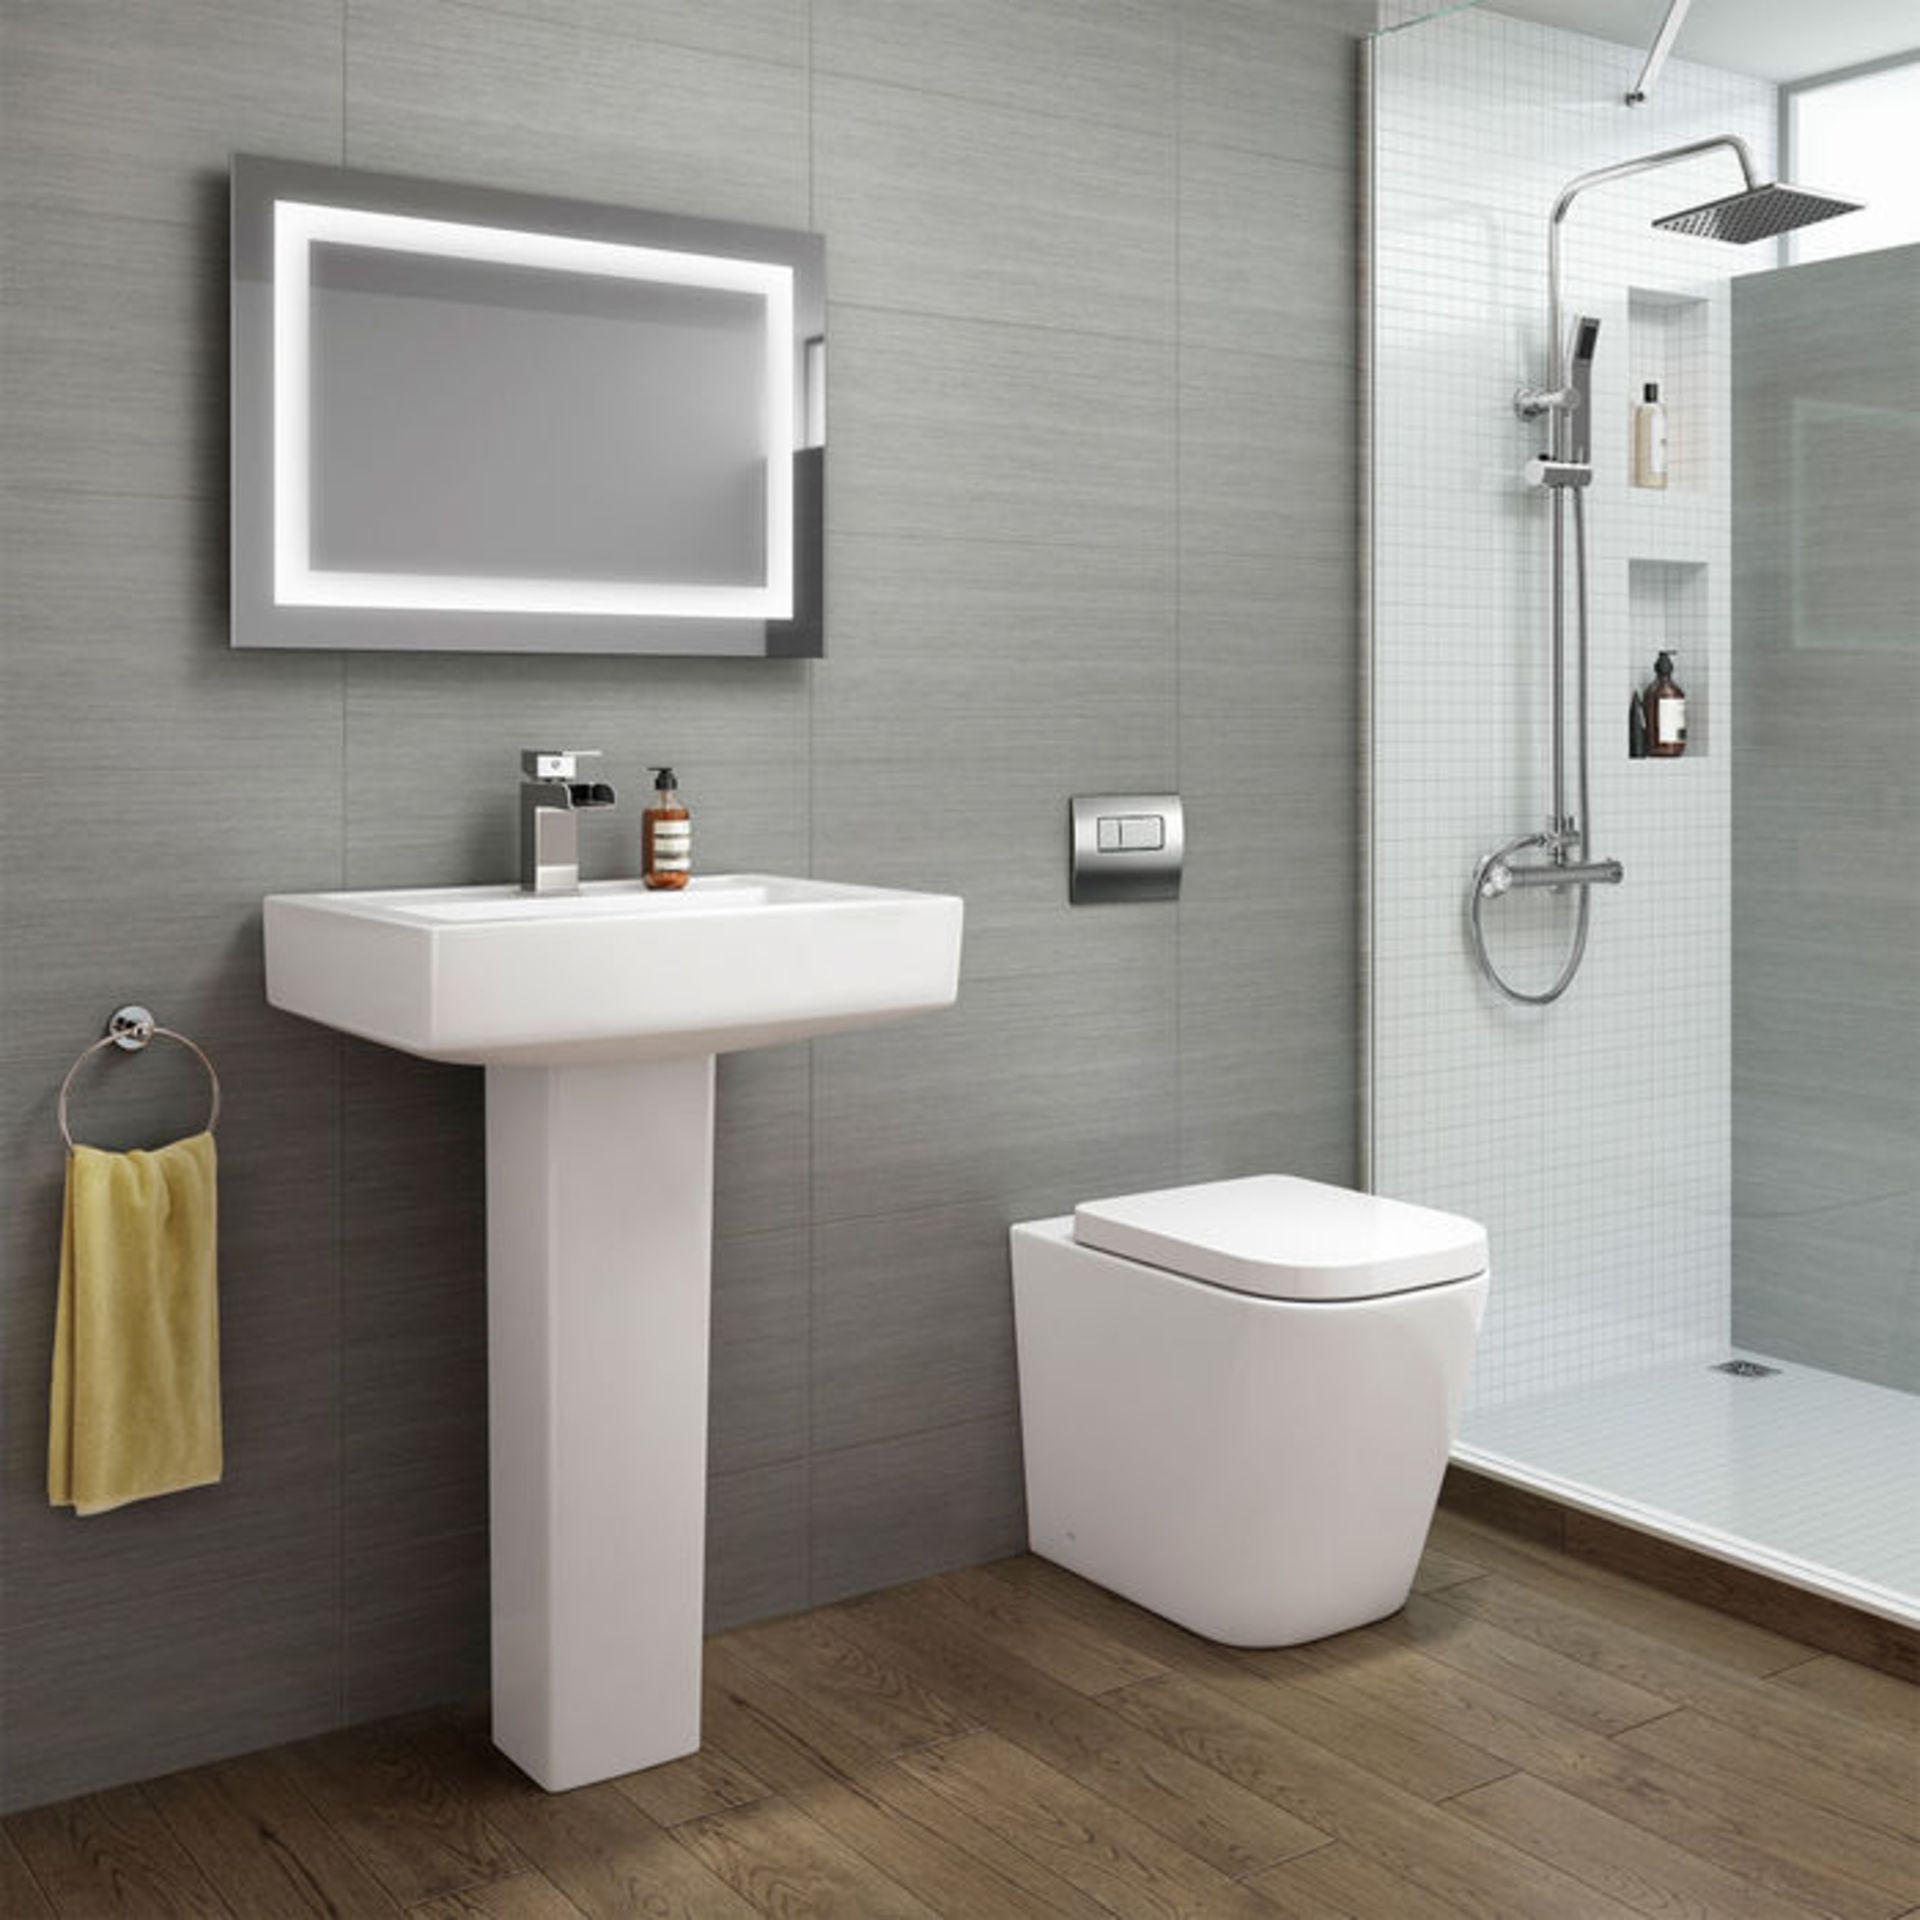 New Florence Rimless Back To Wall Toilet Inc Luxury Soft Close Seat Rimless Design Makes I... - Image 2 of 2